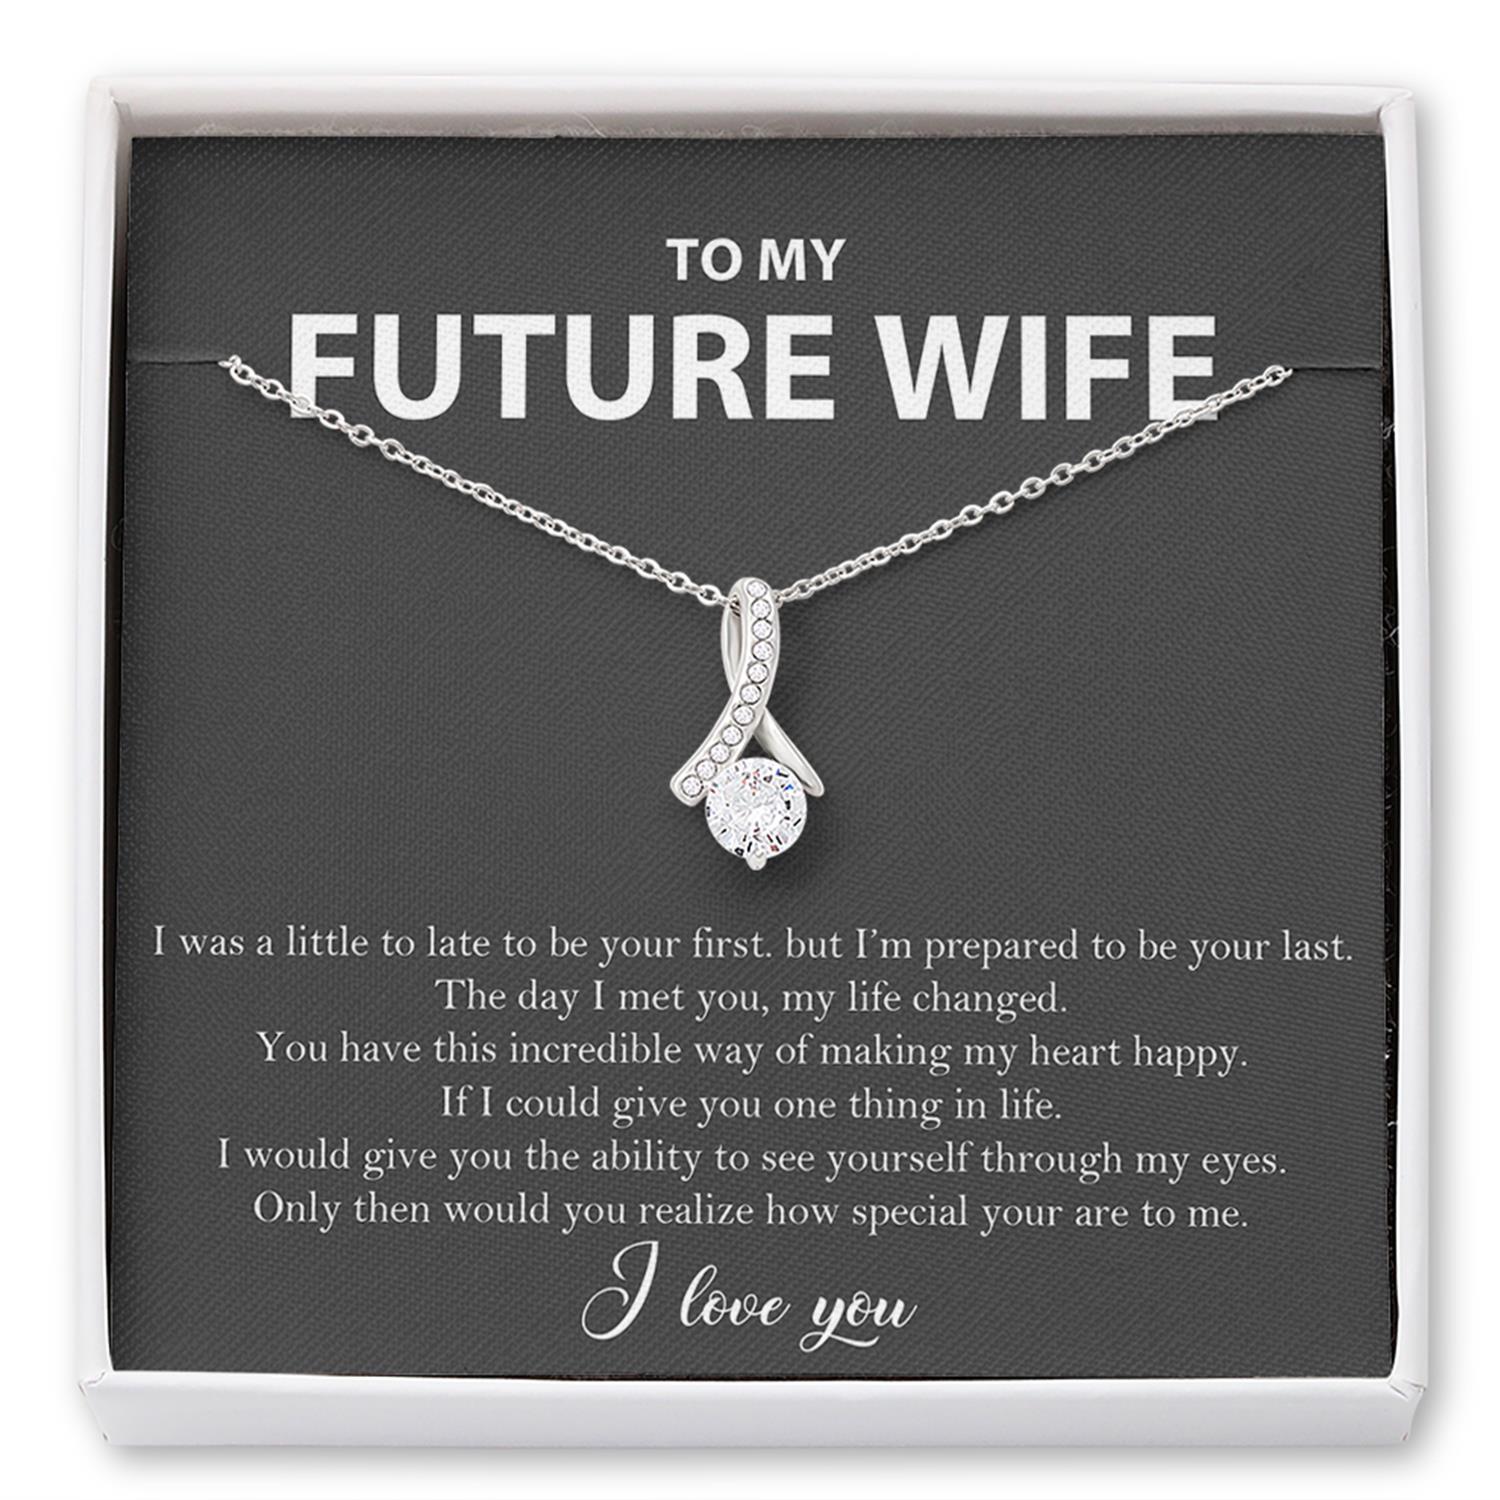 Christmas gifts for wife, wife necklace, wife gifts - SO-6966612 - ZILORRA  | Zilorrausa